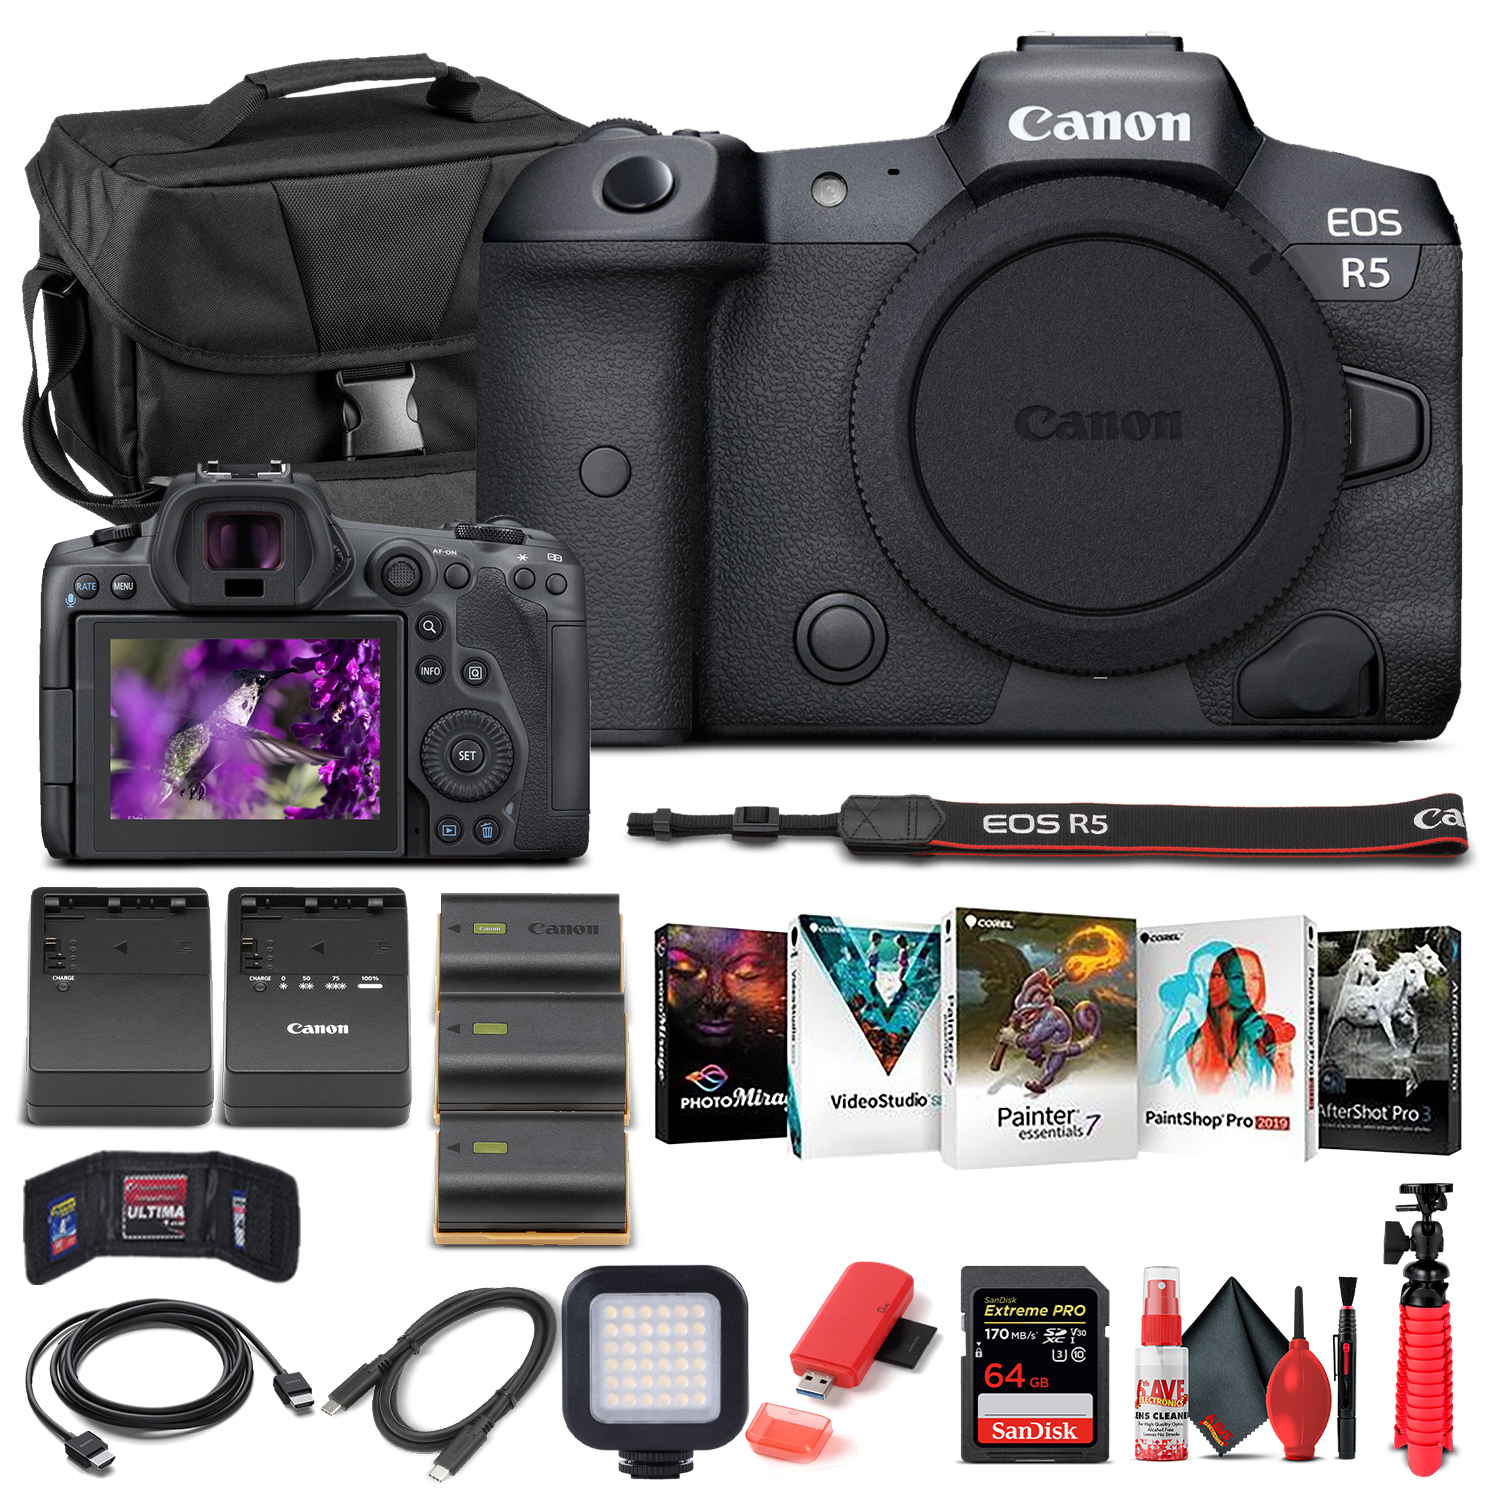 Canon EOS R5 Mirrorless Camera Body Only 4147C002 - Pro Bundle - image 1 of 7